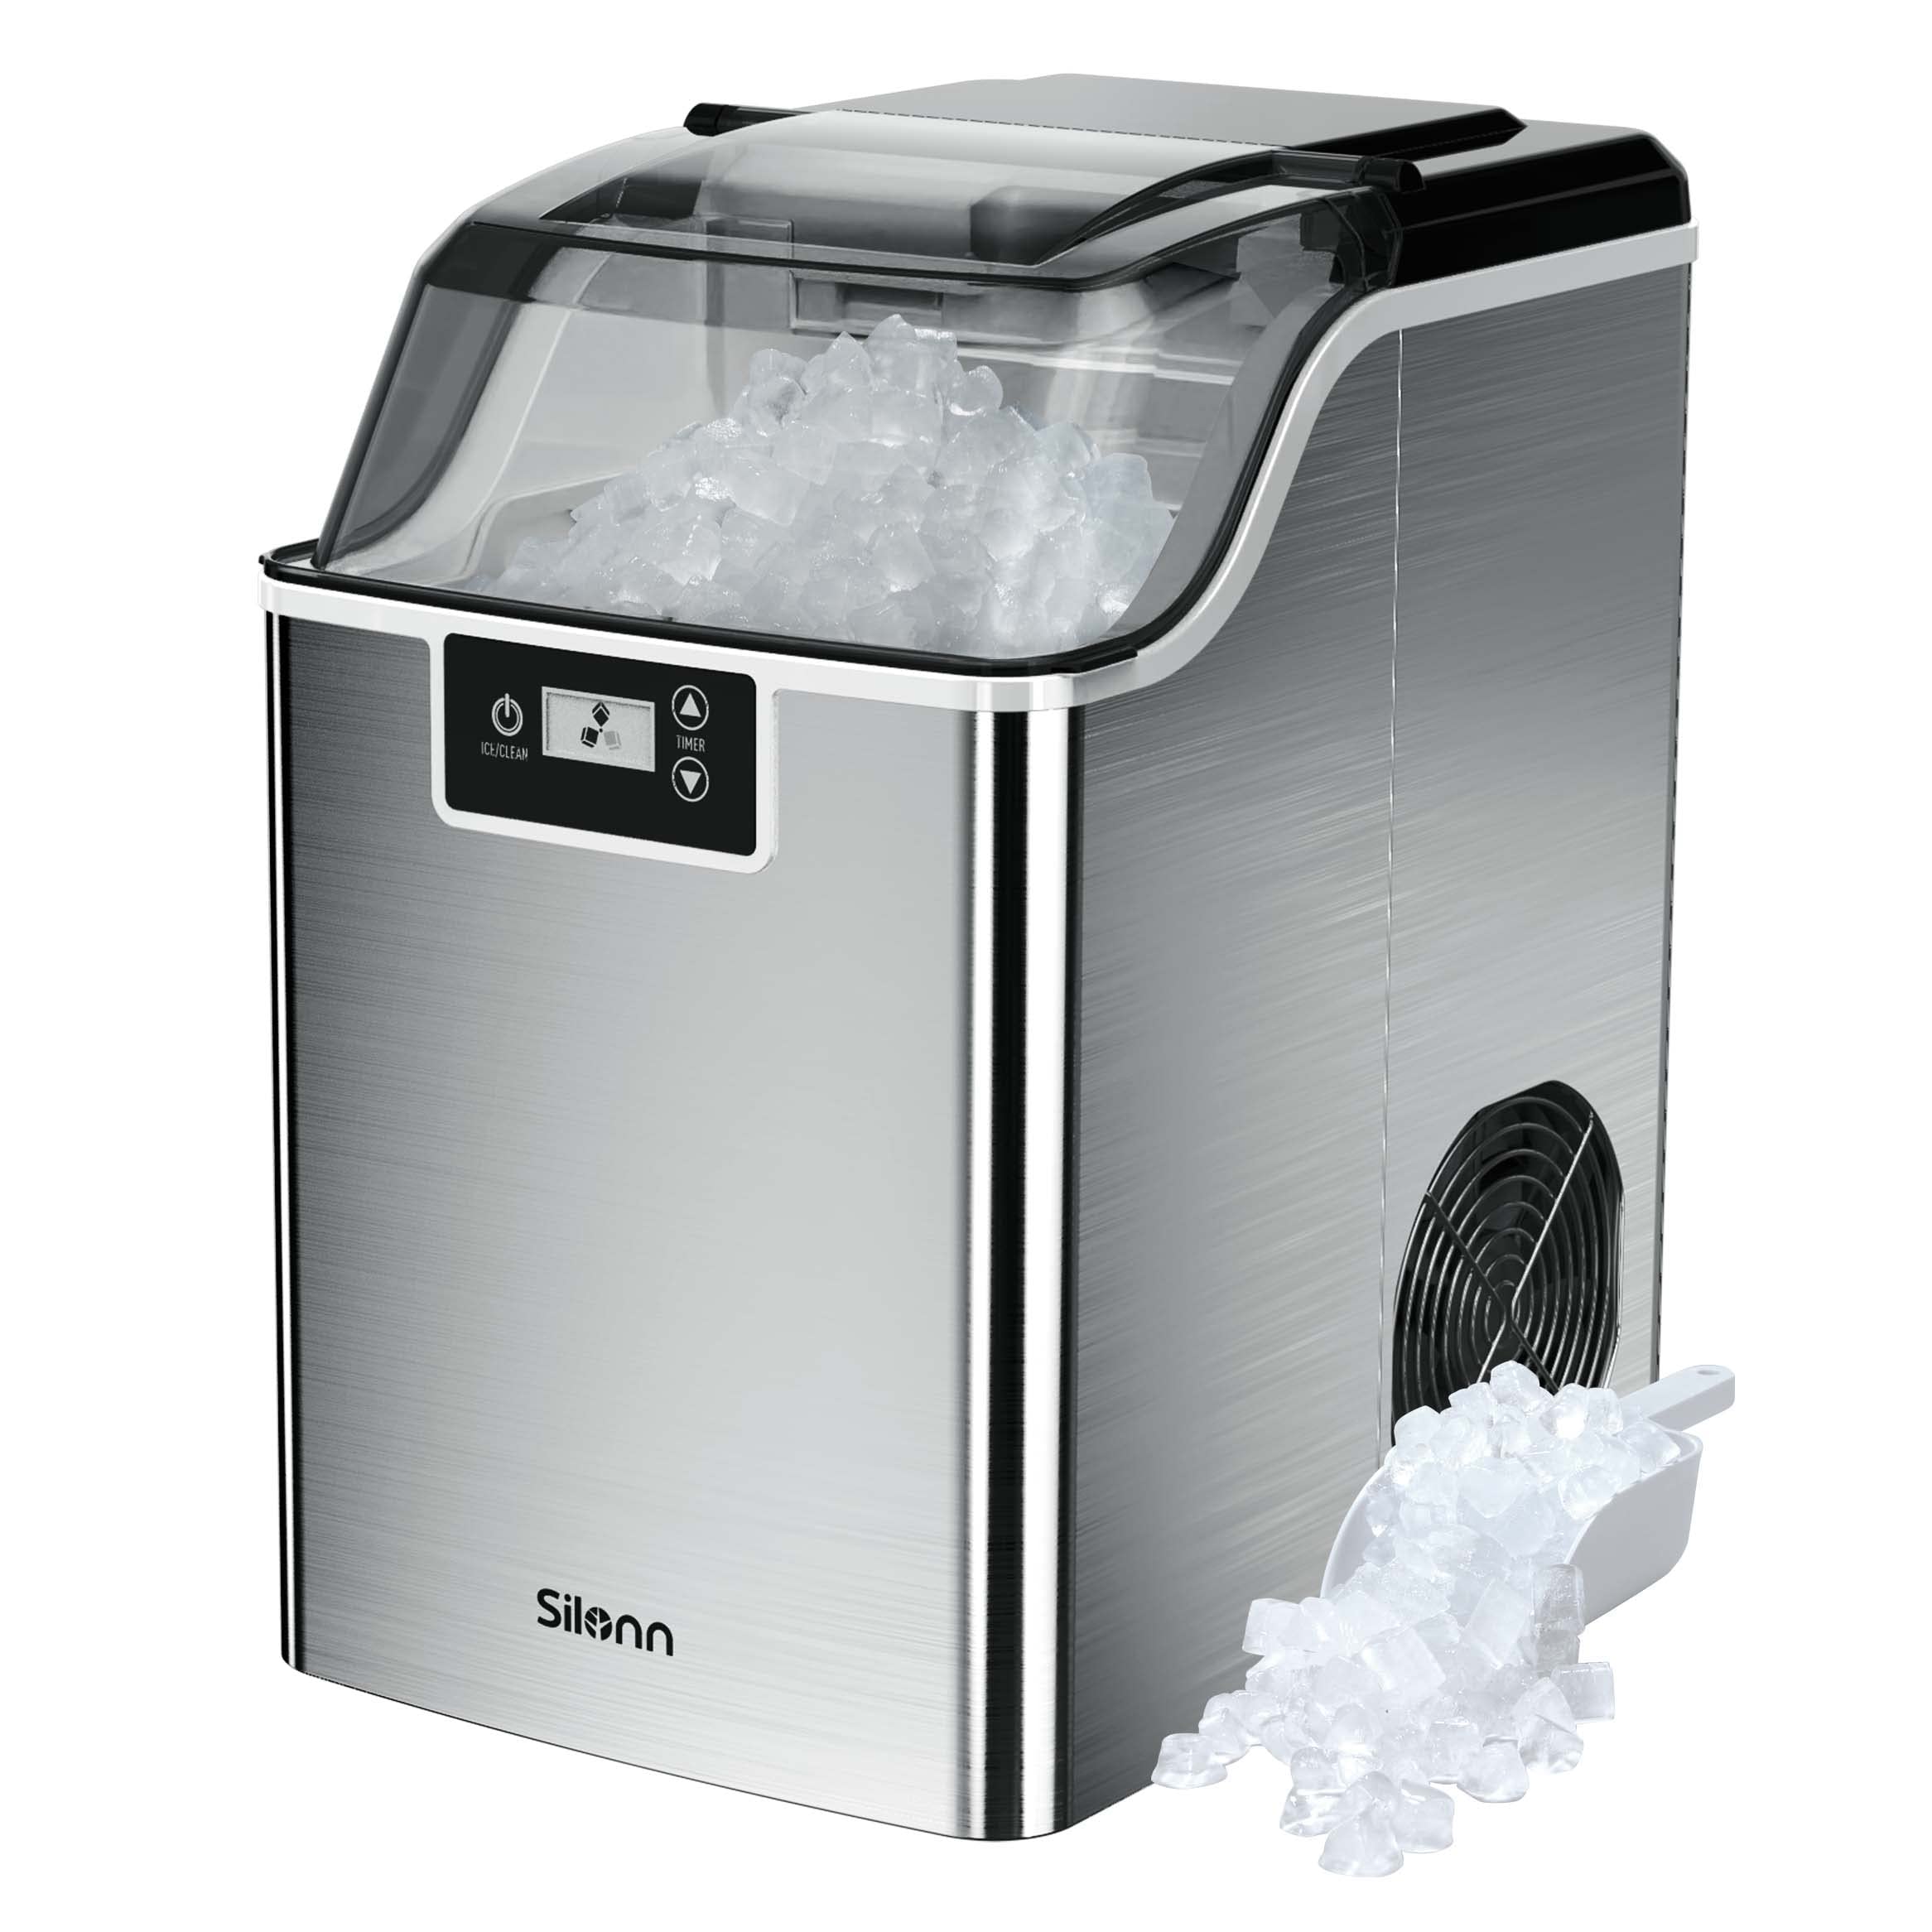 Silonn Compact Nugget Ice Maker，44lbs/Day Pellet Ice Maker Machine with Timer & Self-Cleaning Function, Portable Countertop Ice Maker for Home, Office, Bar, Perfect for Cocktails & Smoothies